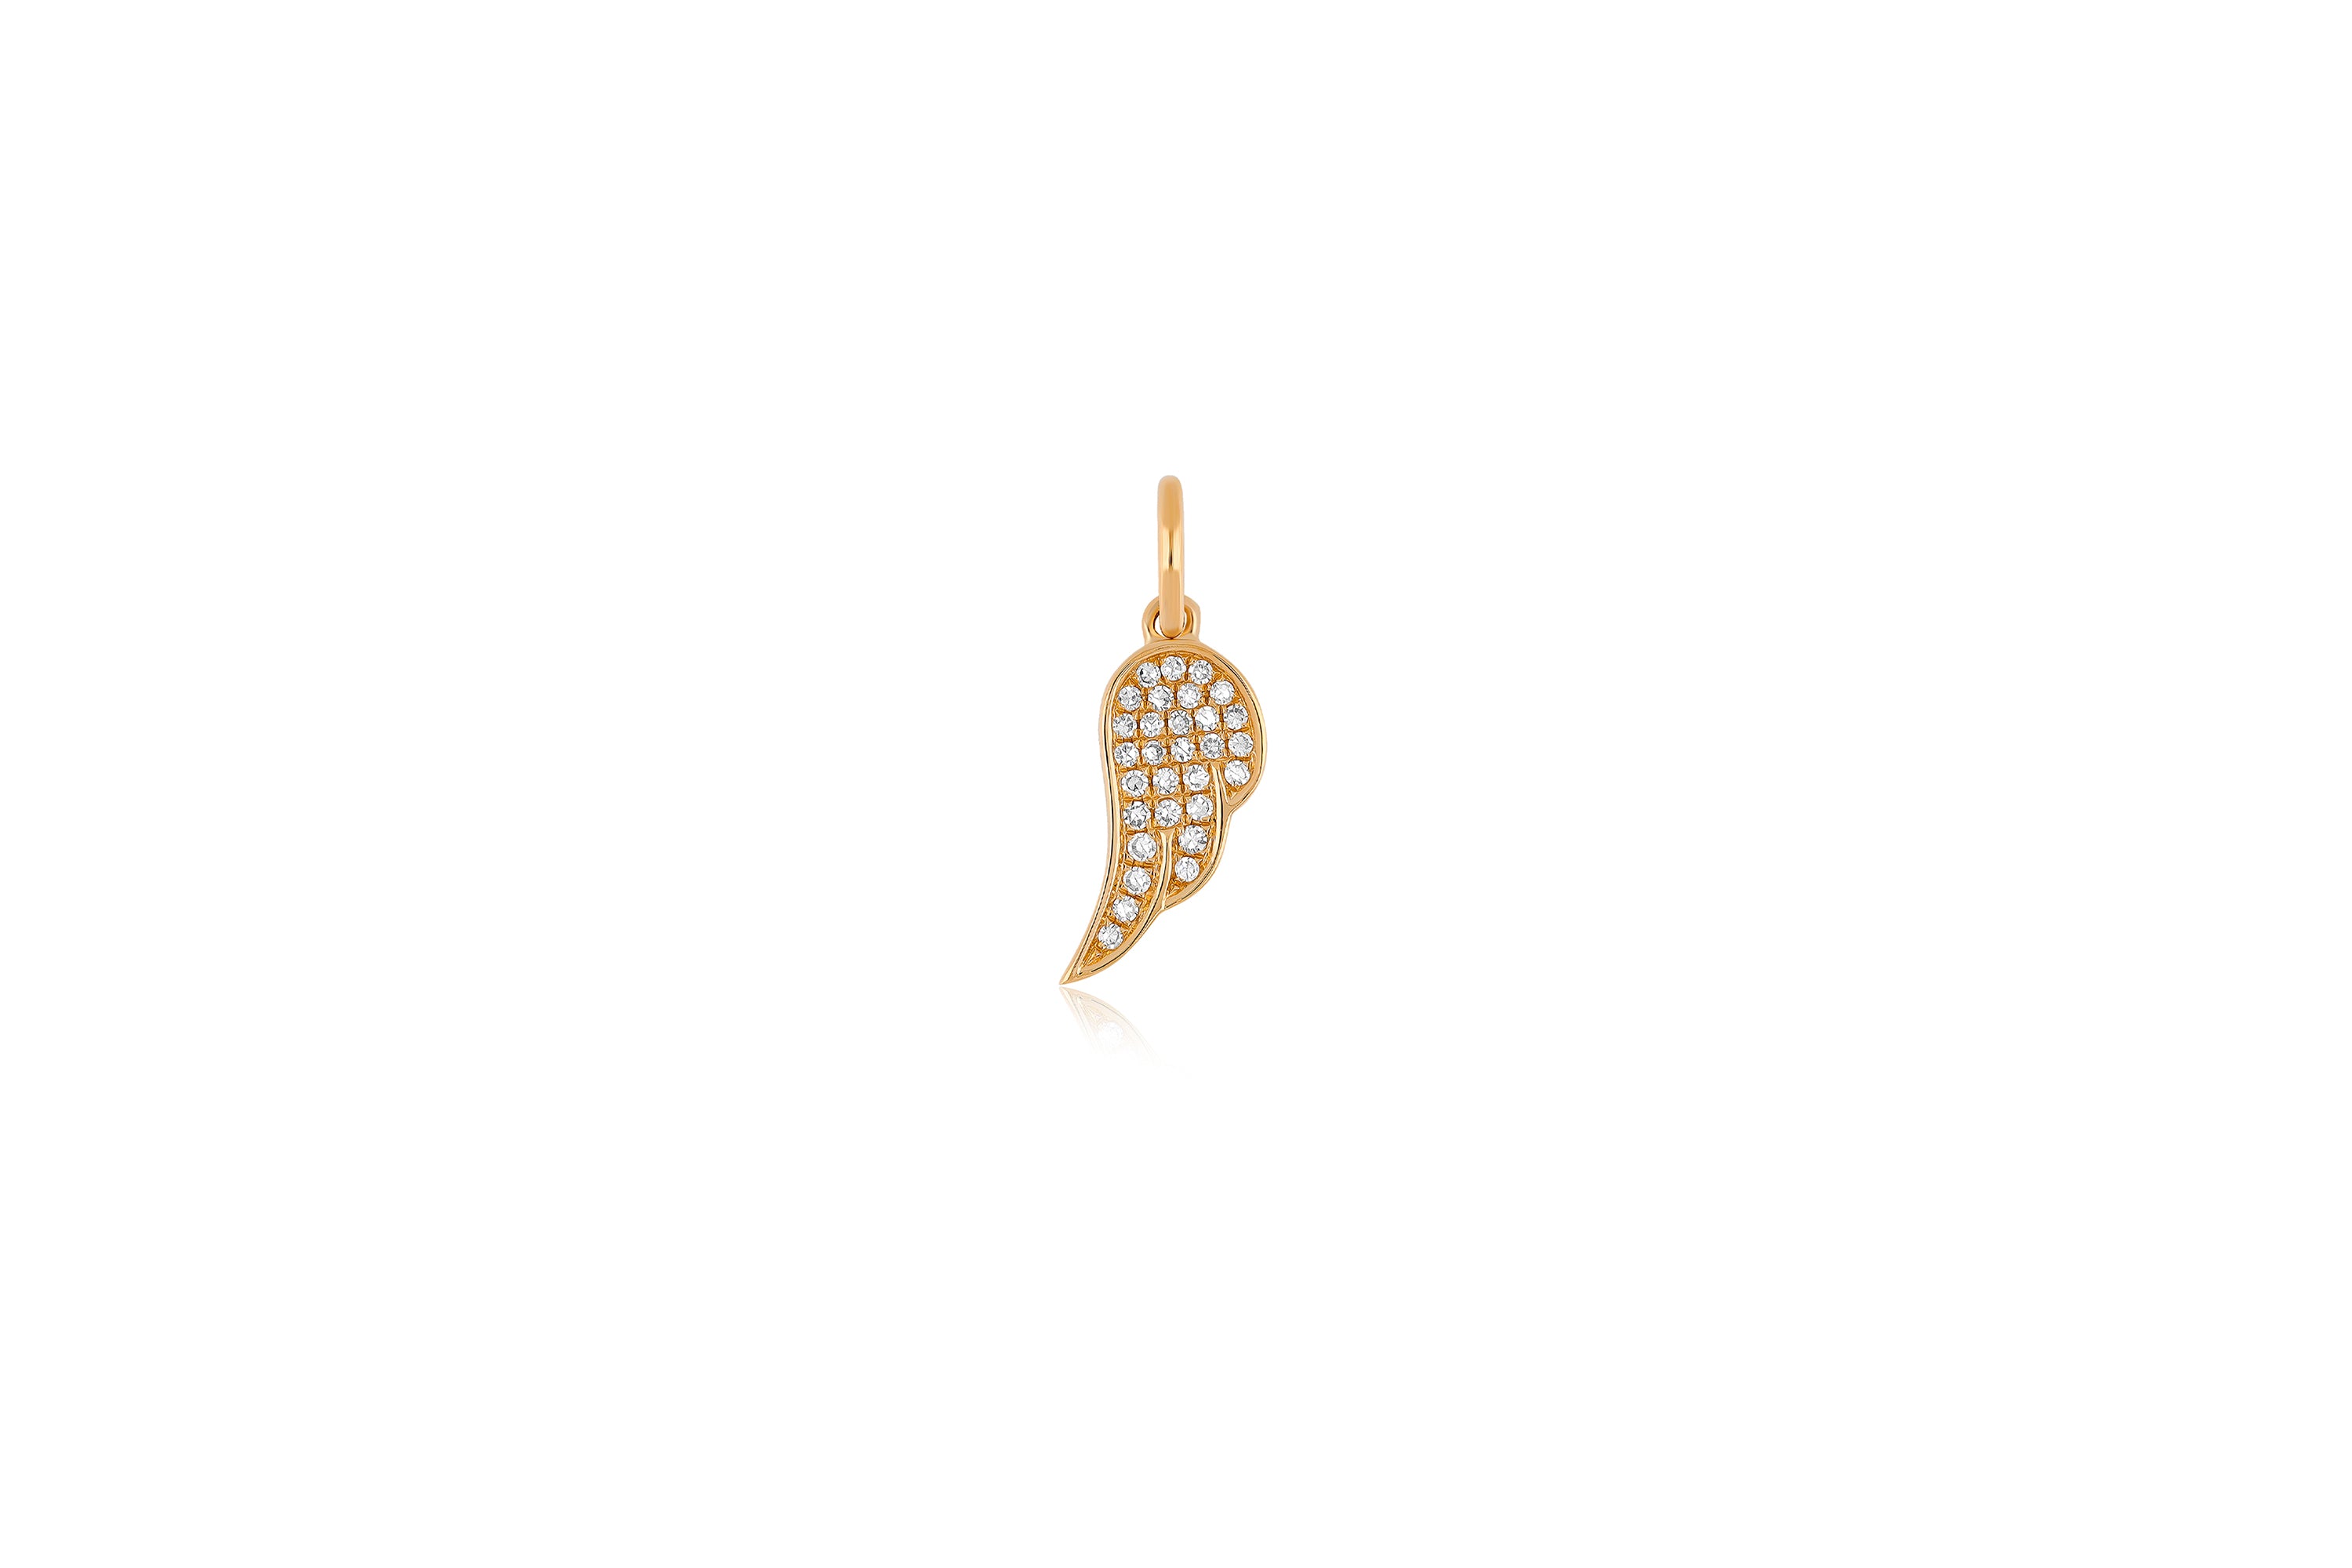 14k (karat) rose gold single angel wing necklace charm measuring 10.5 mm in height and 6.5 mm in width.